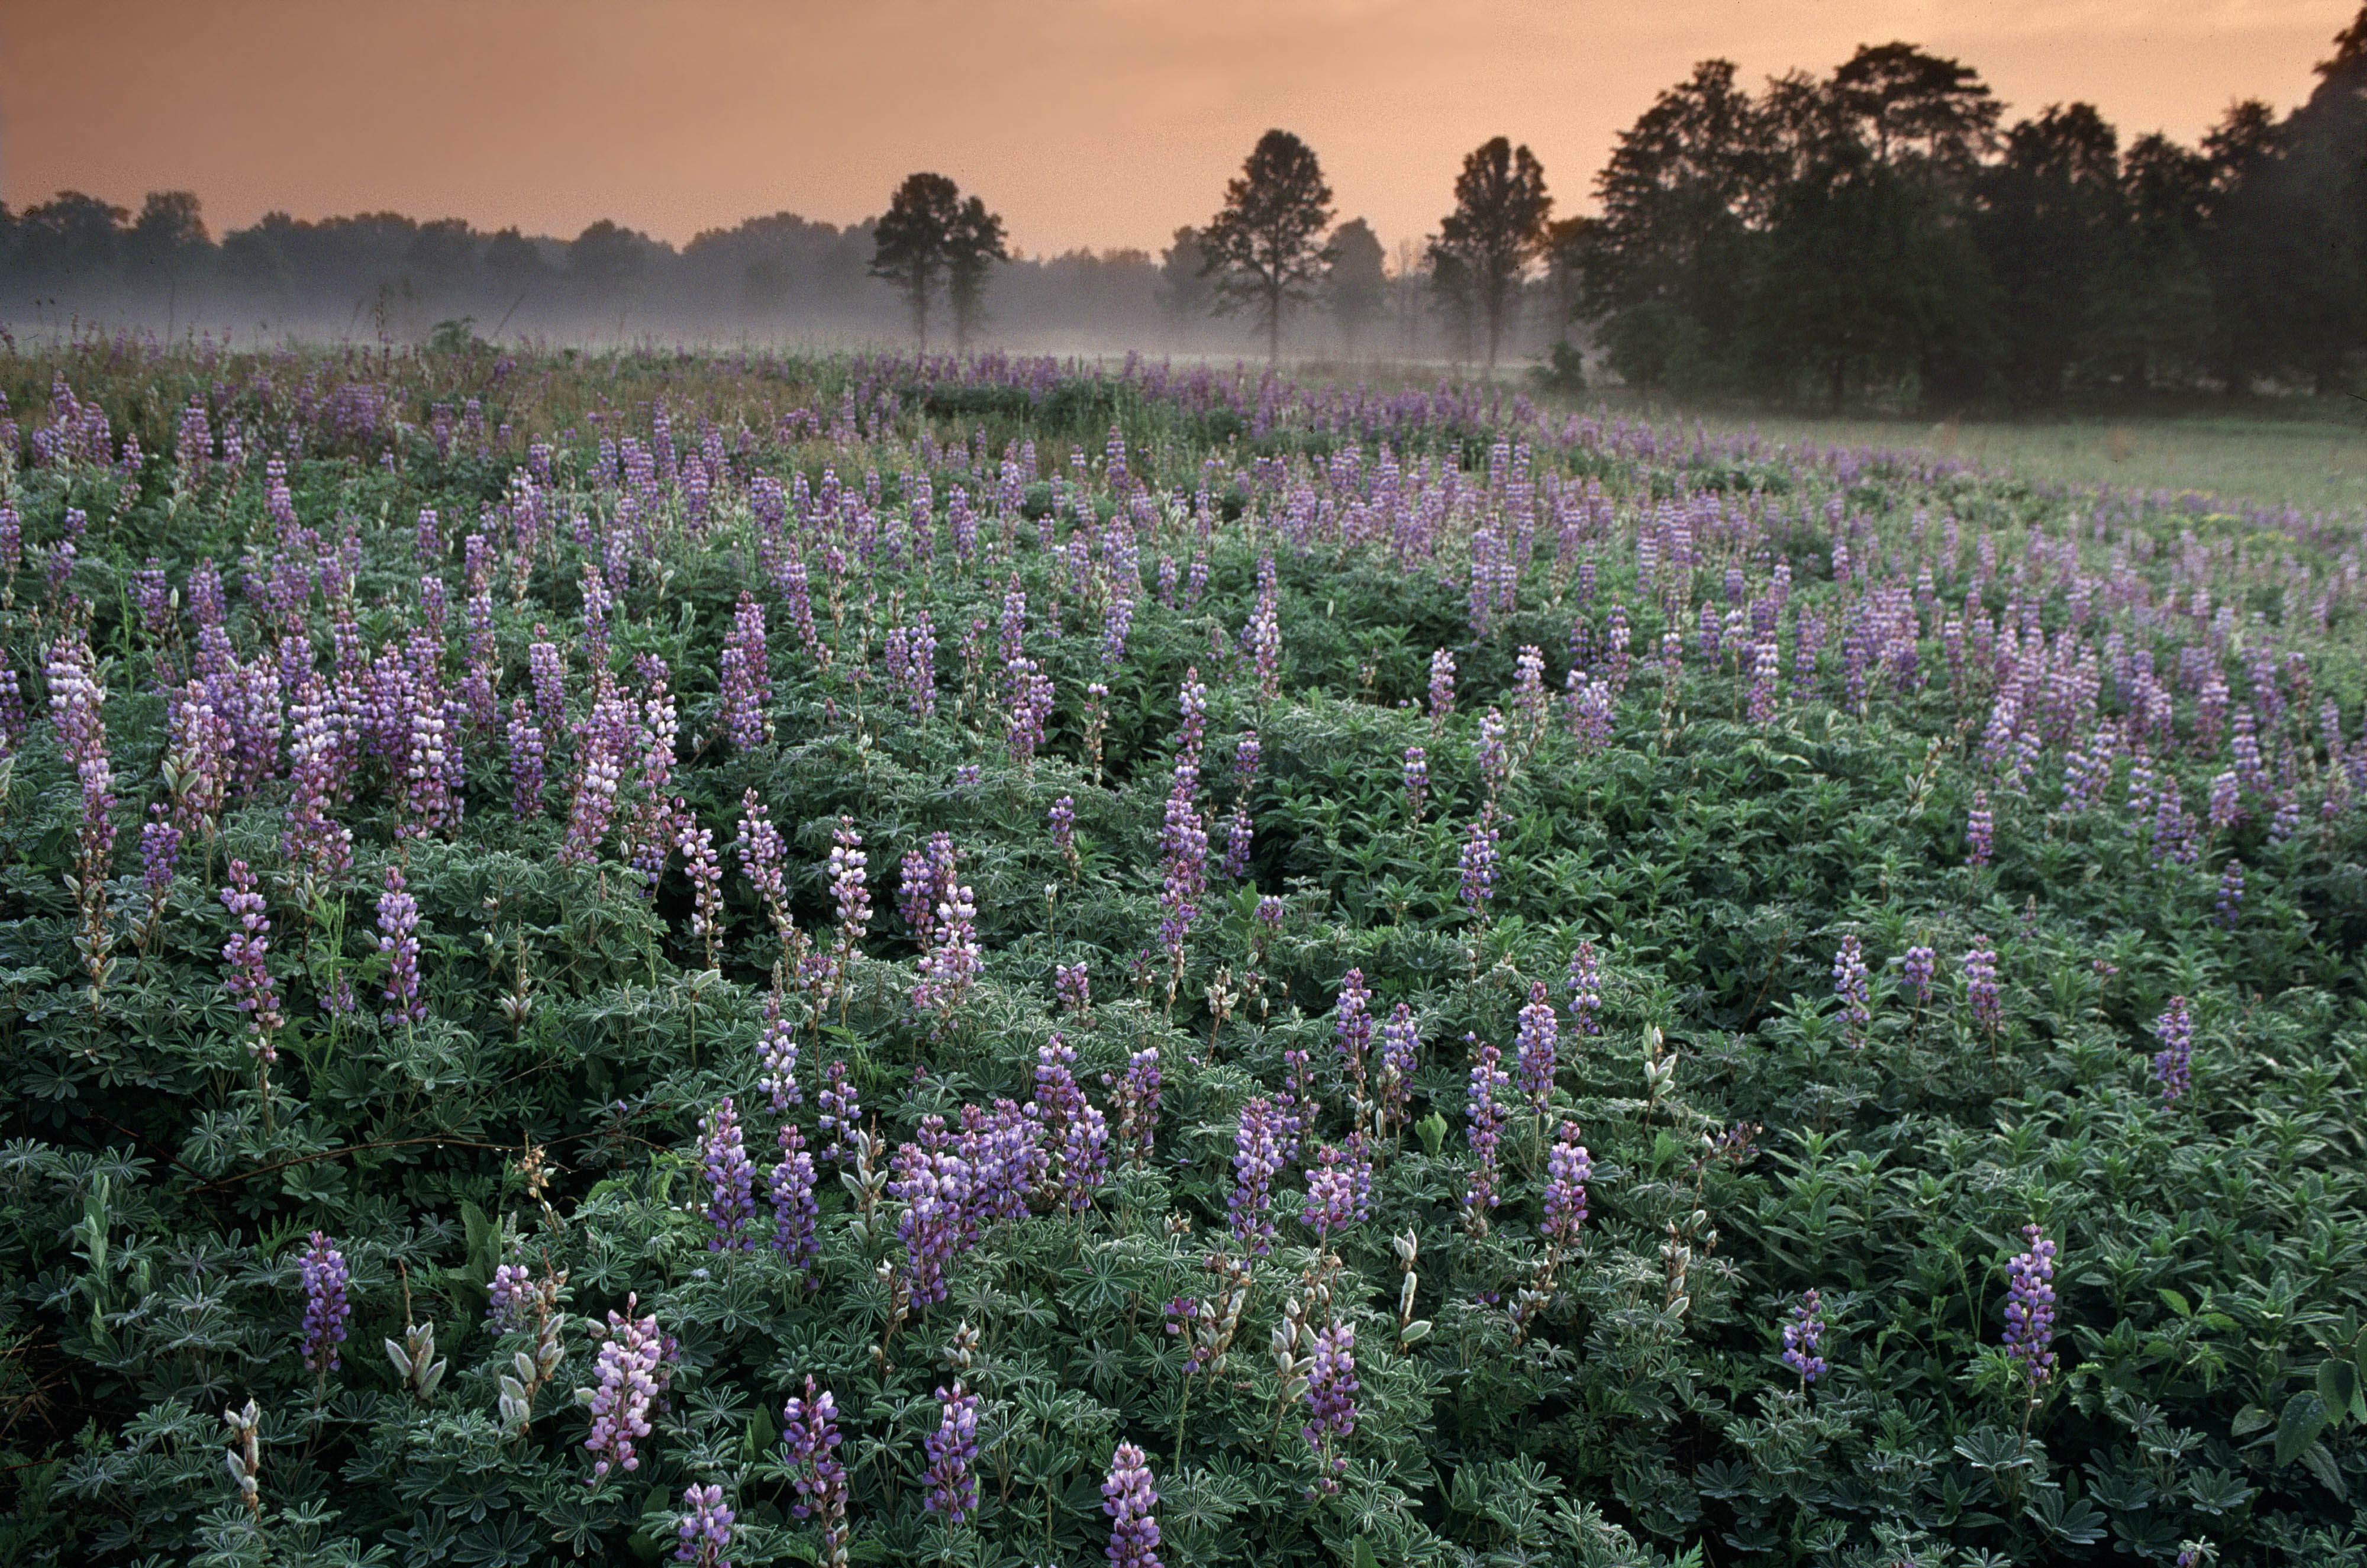 Wild blue lupine blooms paint a field with shades of purple against an orange sunset.